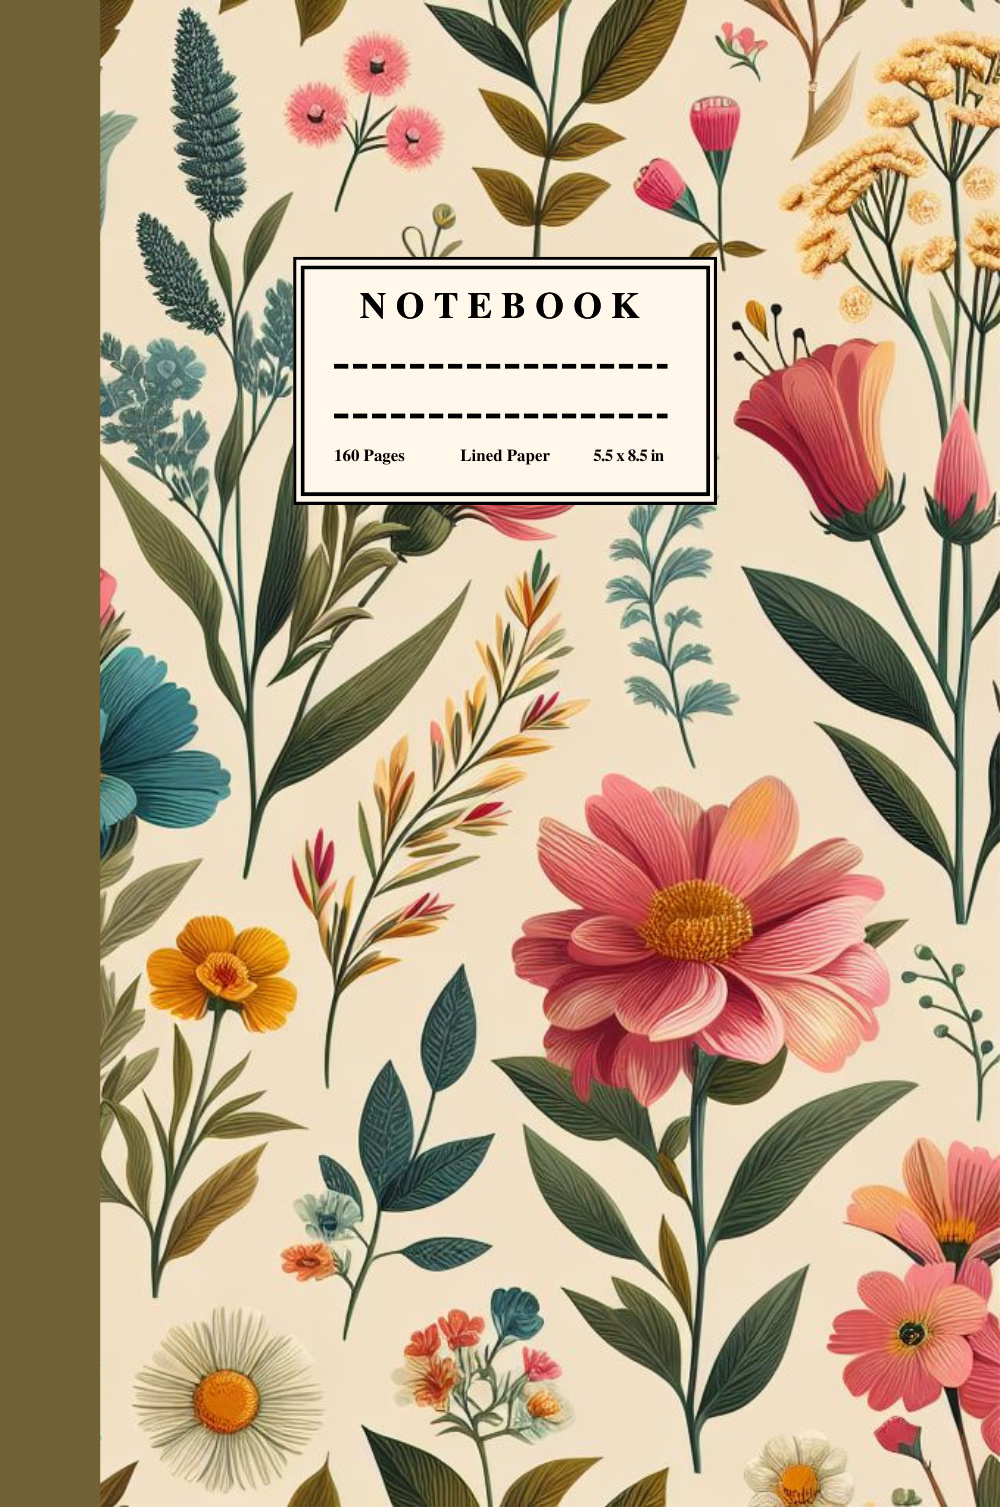 Notebook: Vintage Floral Wildflower Cover 160 Lined Cream Pages 5.5" X 8.5" Hardcover Writing Journal Diary for School College Work